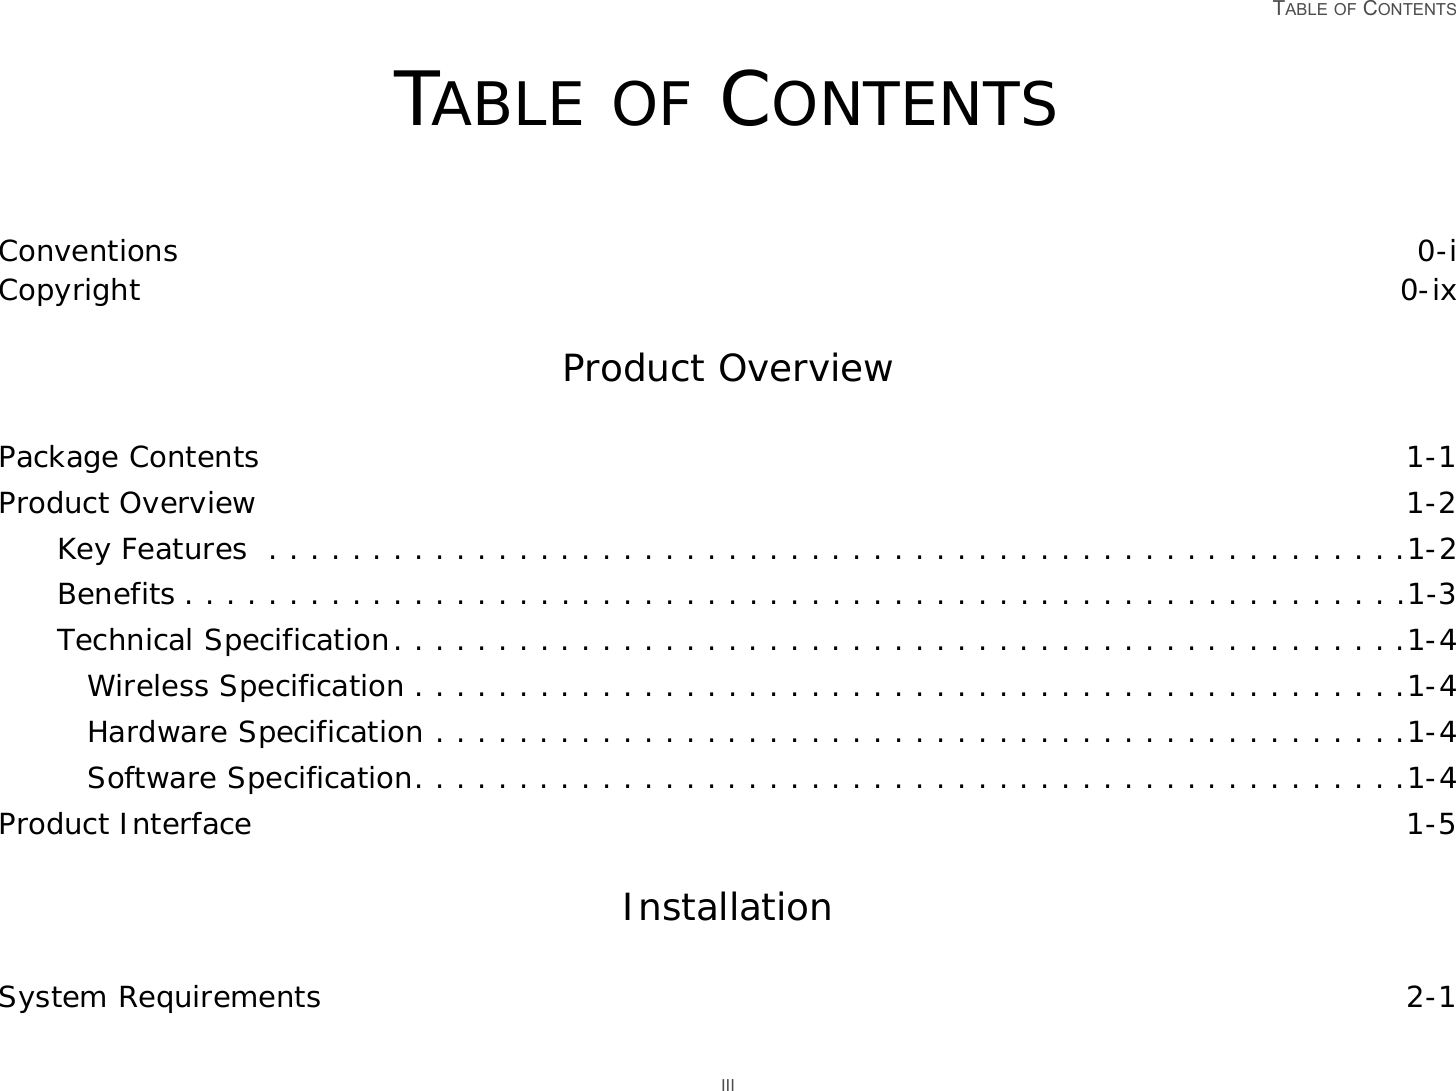   TABLE OF CONTENTS IIITABLE OF CONTENTSConventions 0-iCopyright 0-ixProduct Overview Package Contents 1-1Product Overview 1-2Key Features  . . . . . . . . . . . . . . . . . . . . . . . . . . . . . . . . . . . . . . . . . . . . . . . . . . . . . . .1-2Benefits . . . . . . . . . . . . . . . . . . . . . . . . . . . . . . . . . . . . . . . . . . . . . . . . . . . . . . . . . . .1-3Technical Specification. . . . . . . . . . . . . . . . . . . . . . . . . . . . . . . . . . . . . . . . . . . . . . . . .1-4Wireless Specification . . . . . . . . . . . . . . . . . . . . . . . . . . . . . . . . . . . . . . . . . . . . . . . .1-4Hardware Specification . . . . . . . . . . . . . . . . . . . . . . . . . . . . . . . . . . . . . . . . . . . . . . .1-4Software Specification. . . . . . . . . . . . . . . . . . . . . . . . . . . . . . . . . . . . . . . . . . . . . . . .1-4Product Interface 1-5Installation System Requirements 2-1